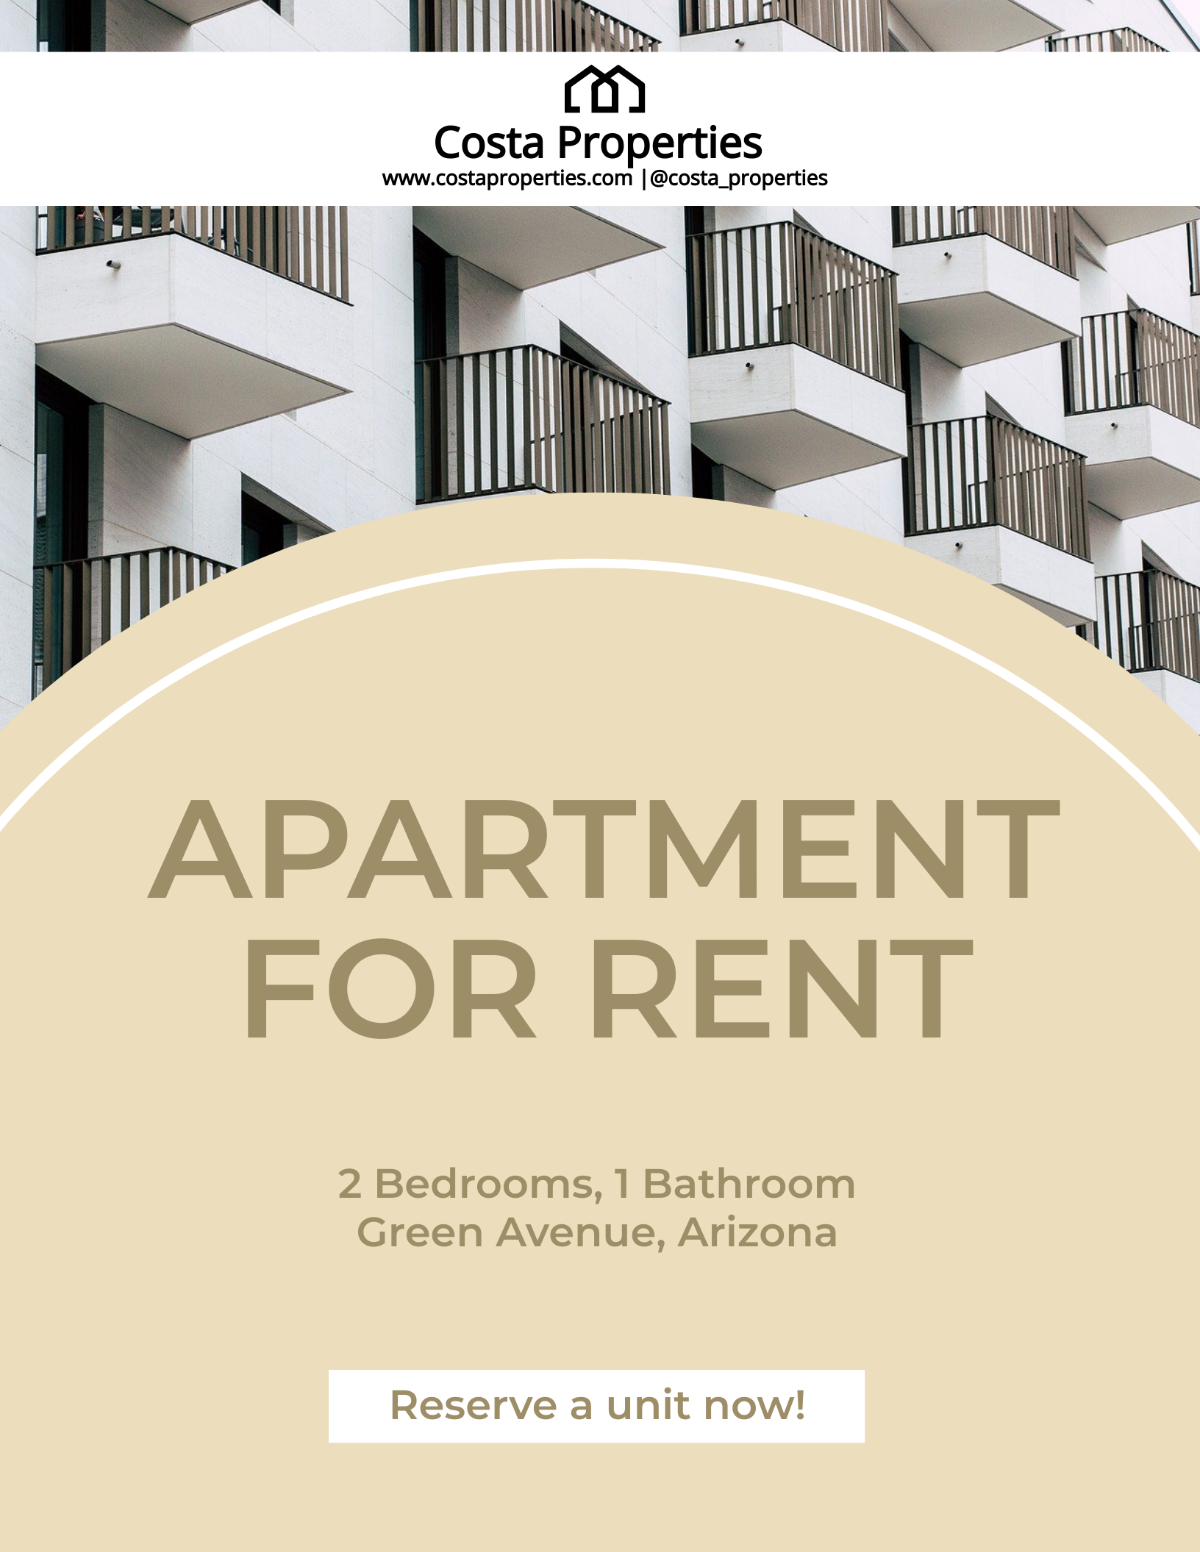 Free Apartment For Rent Flyer Template